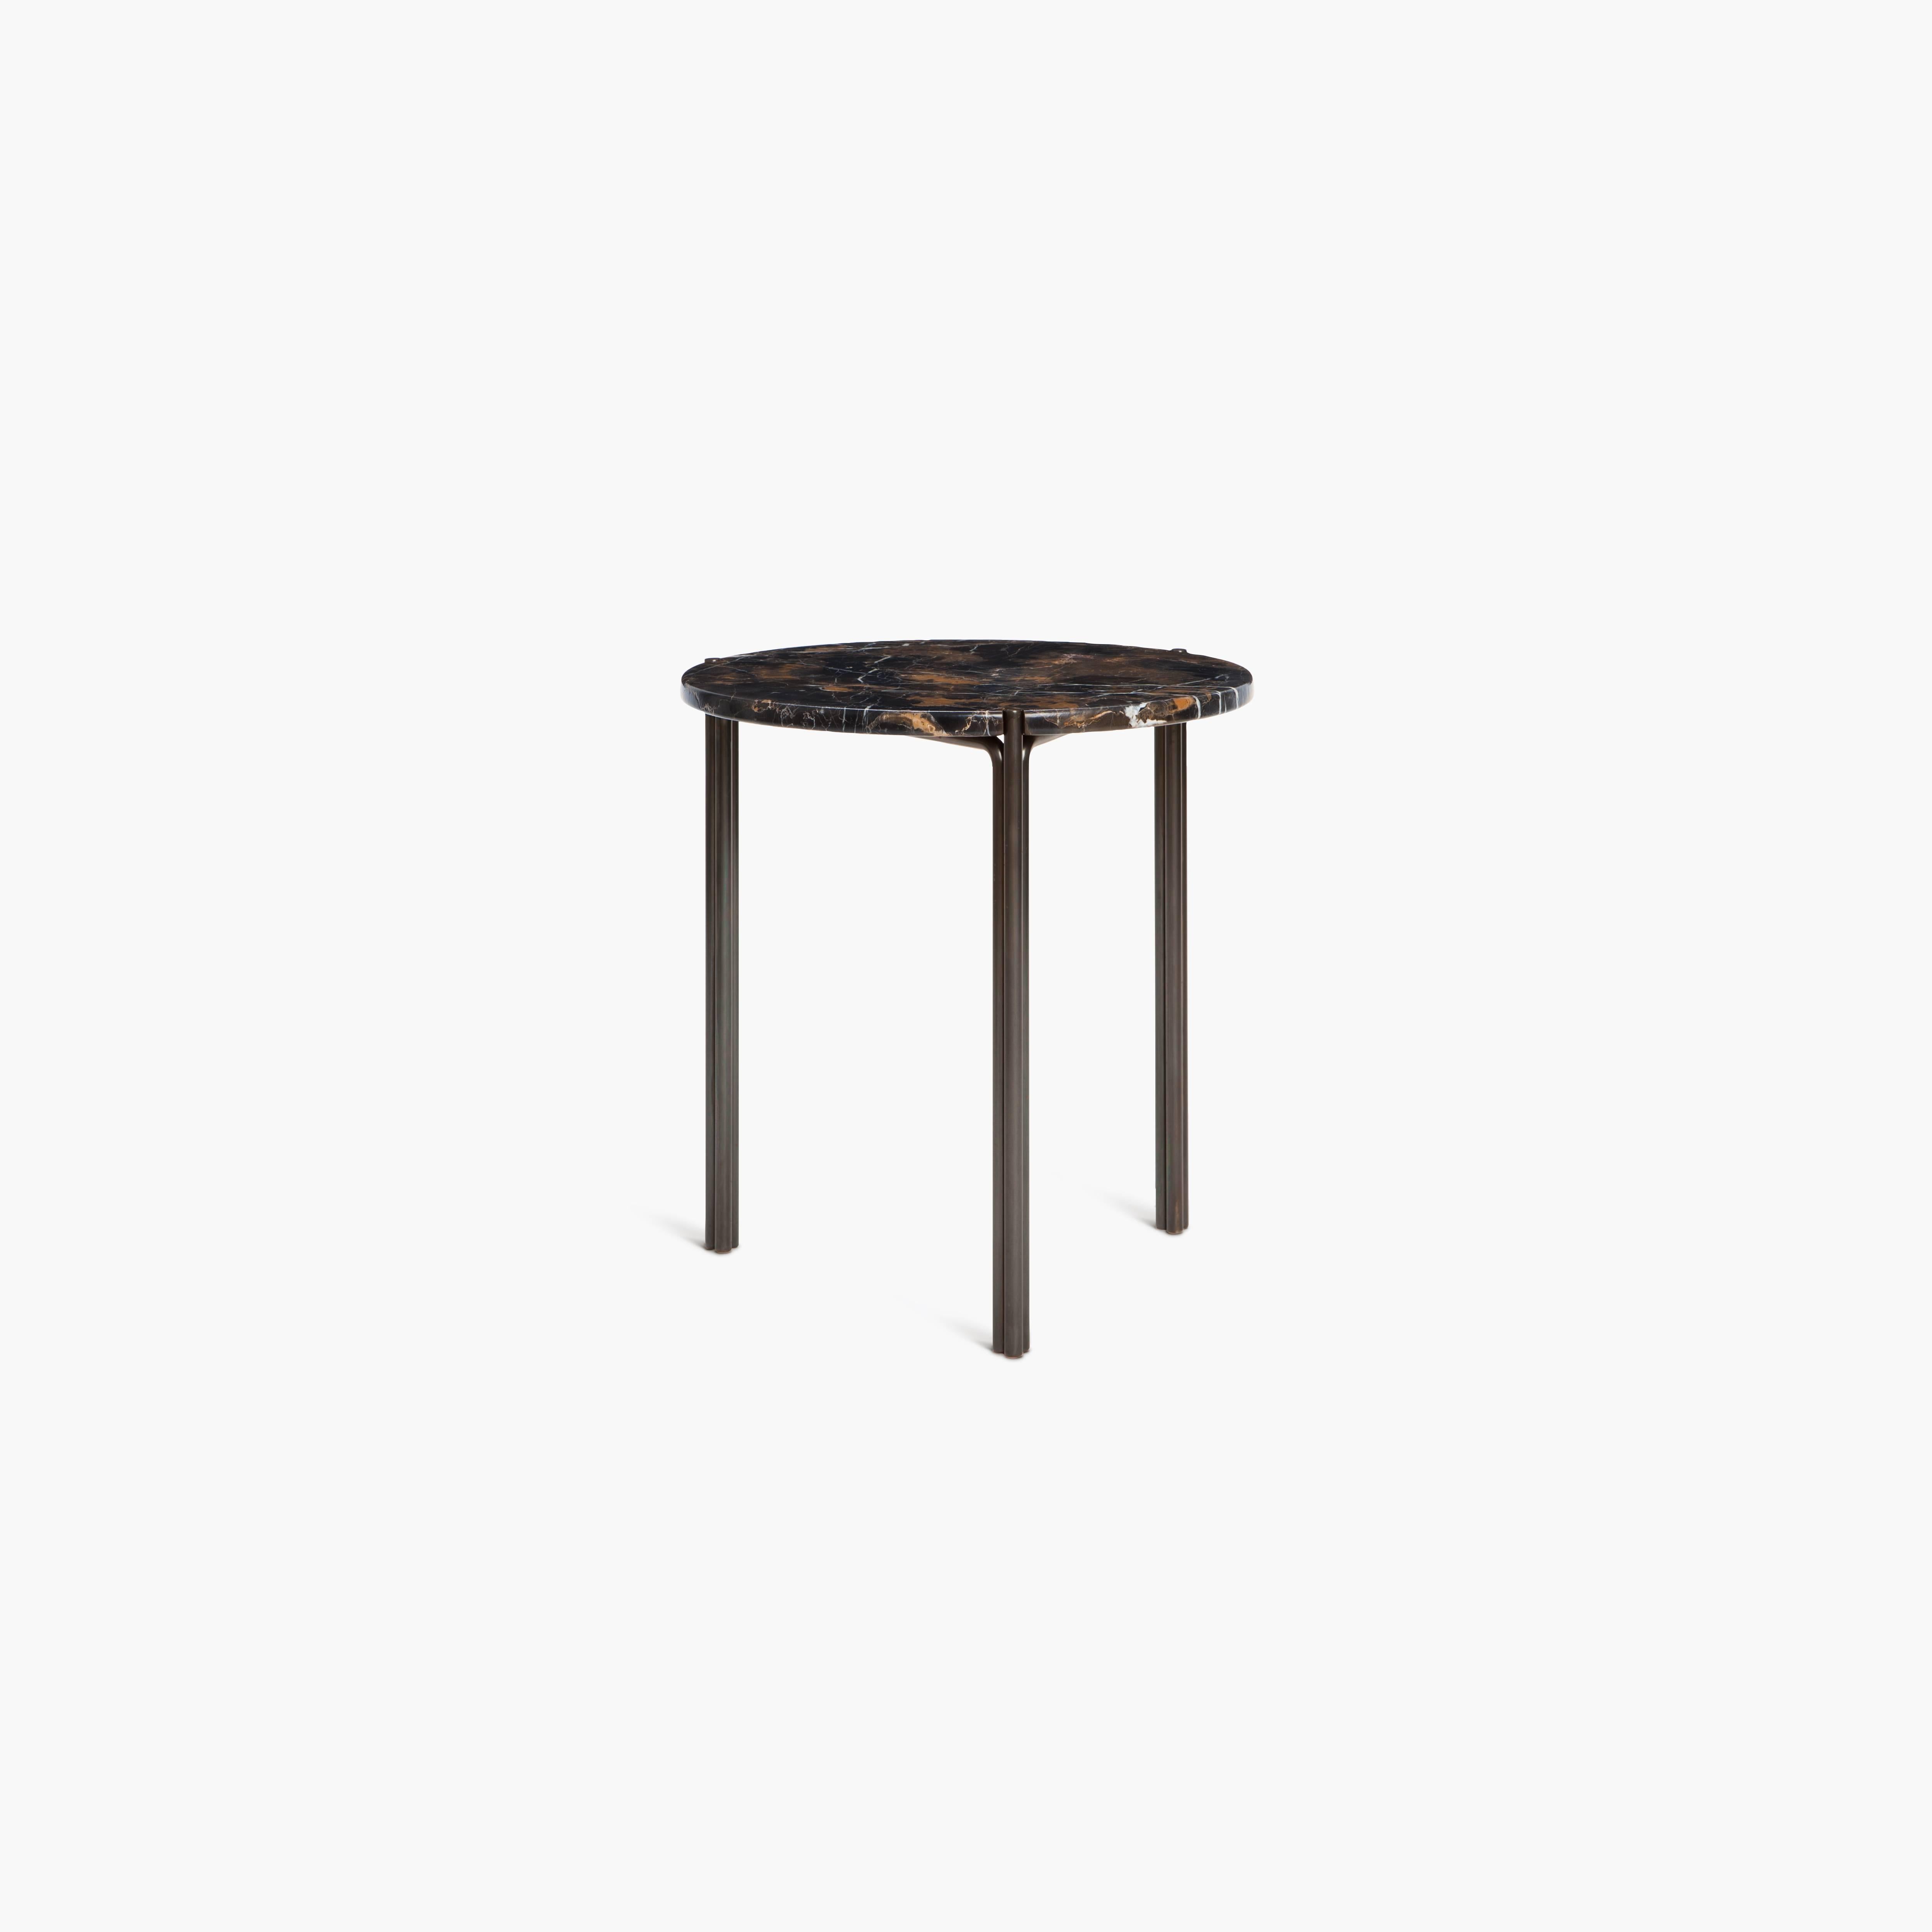 Blackened CA16S Contemporary Handcrafted Minimalist Modern Side Table with Stone Top For Sale